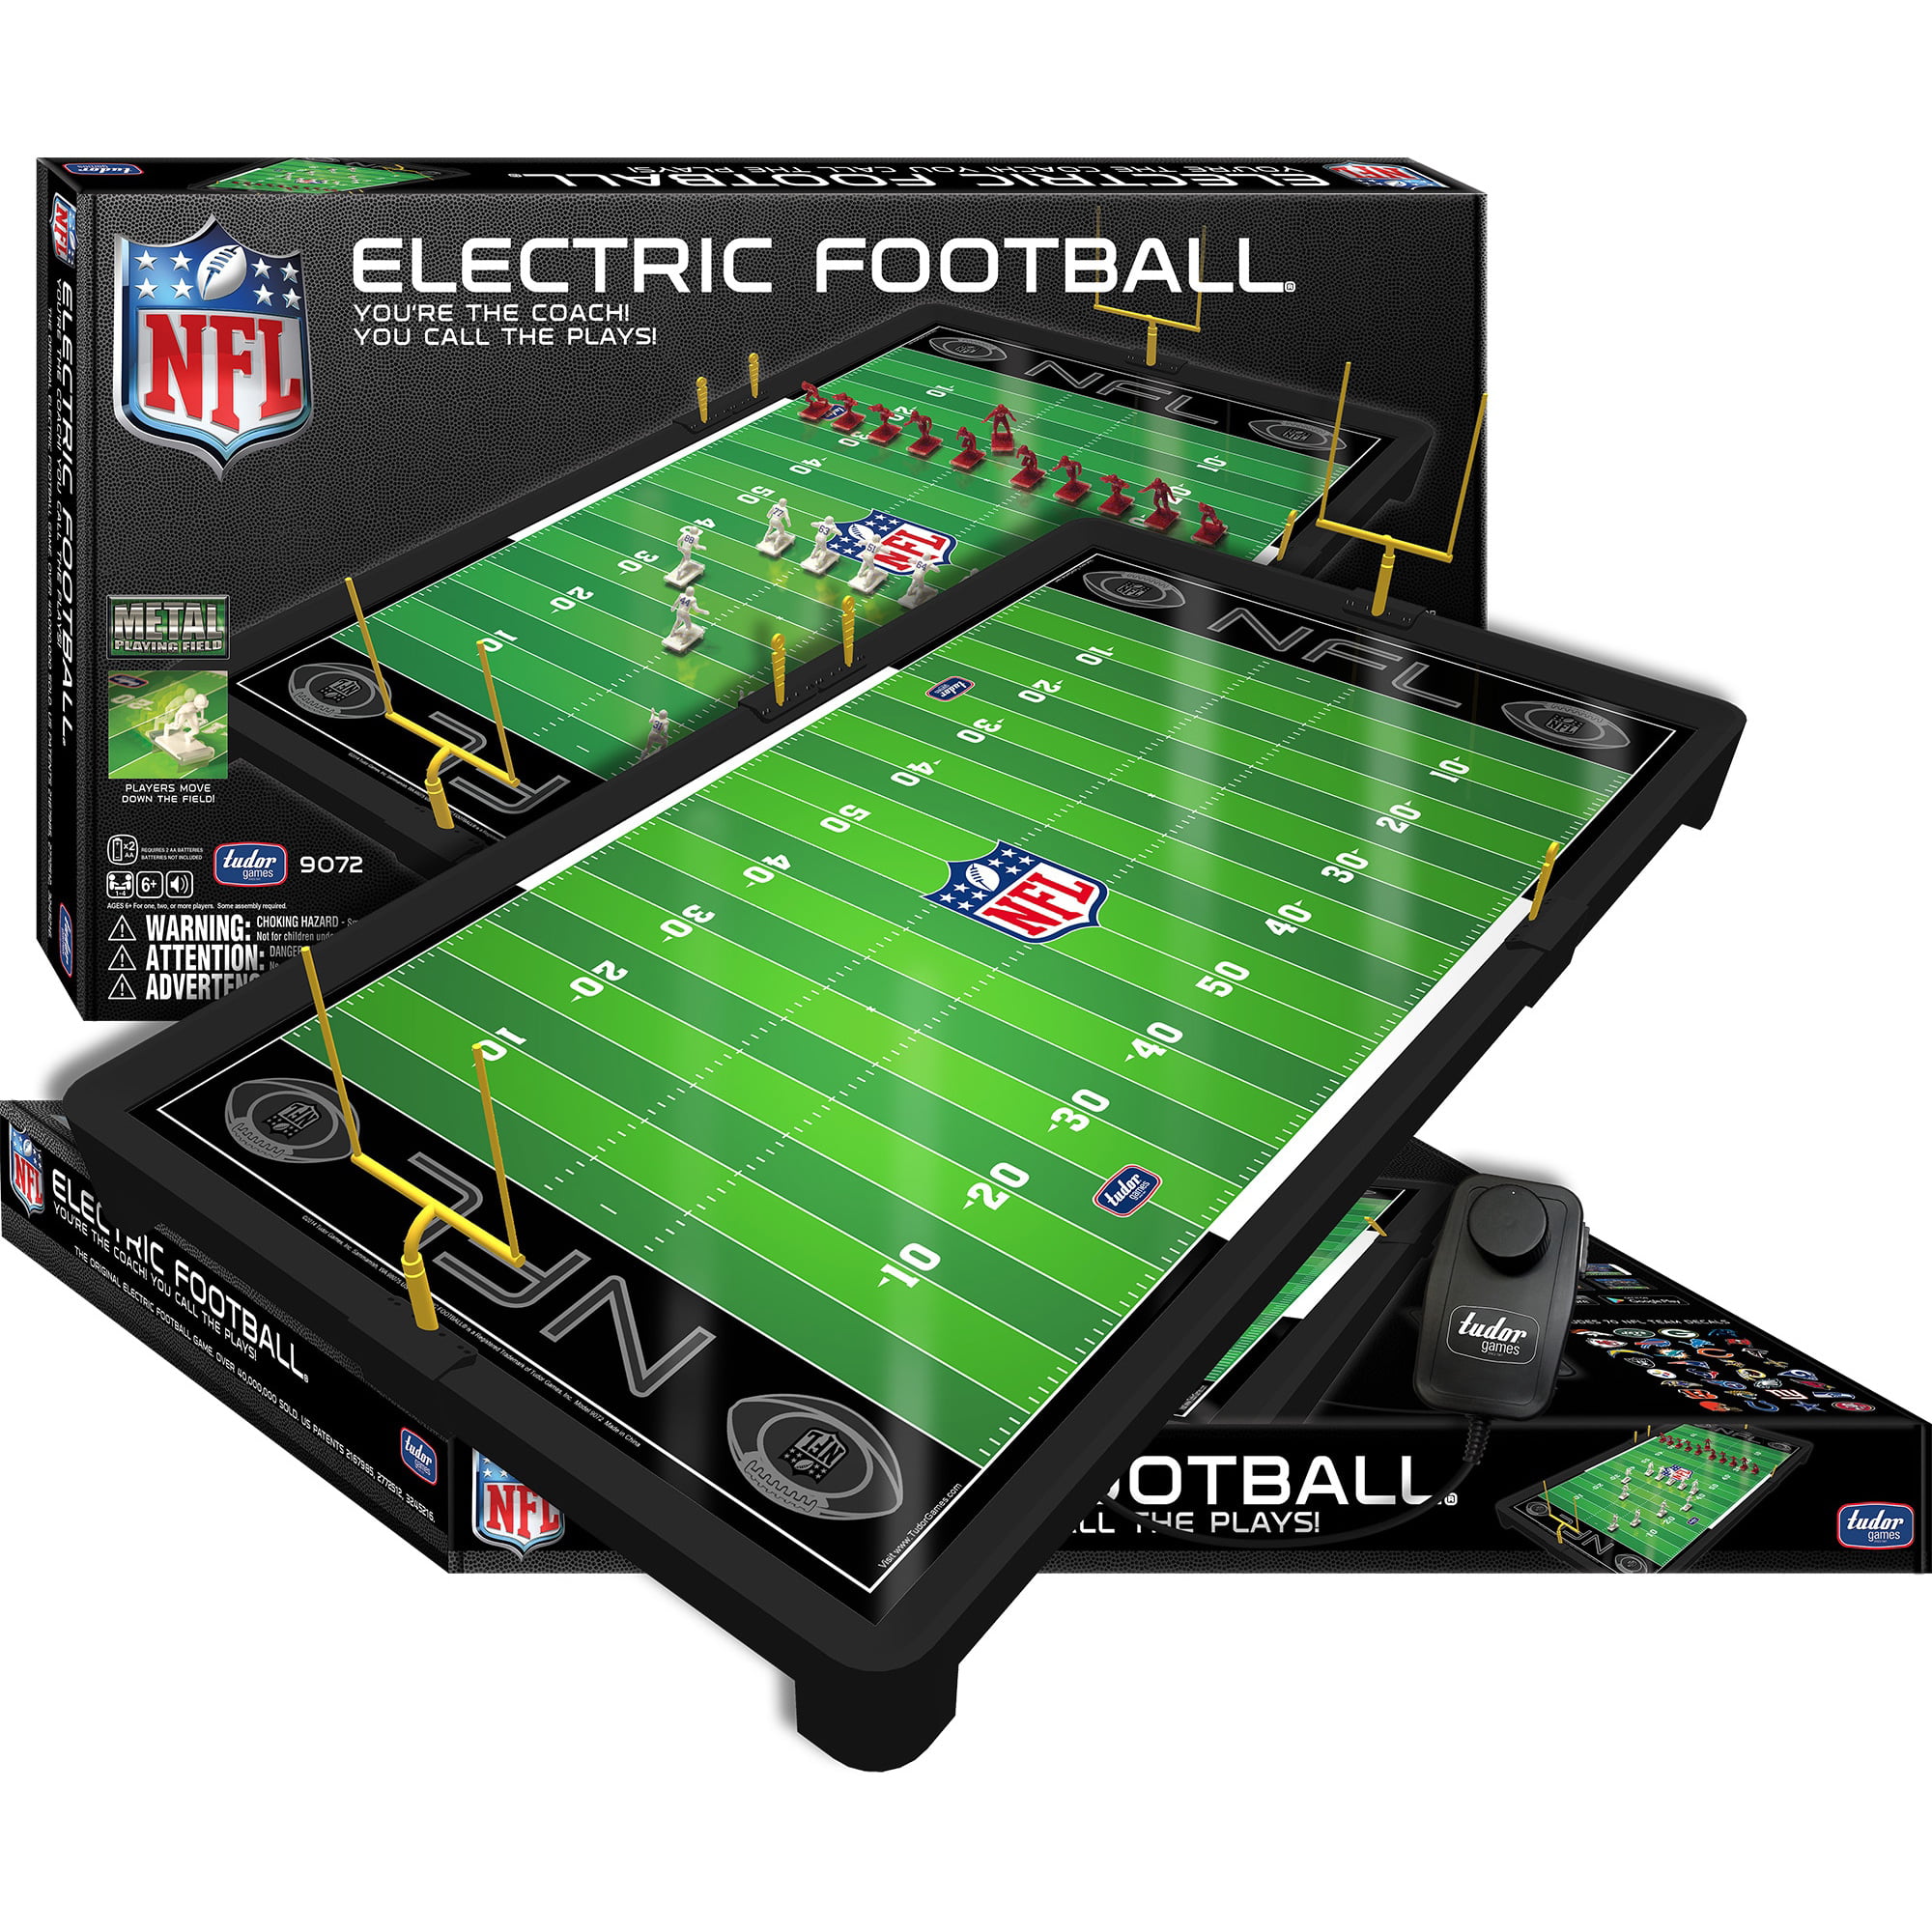 How to Play Electric Football: Tips and Strategies